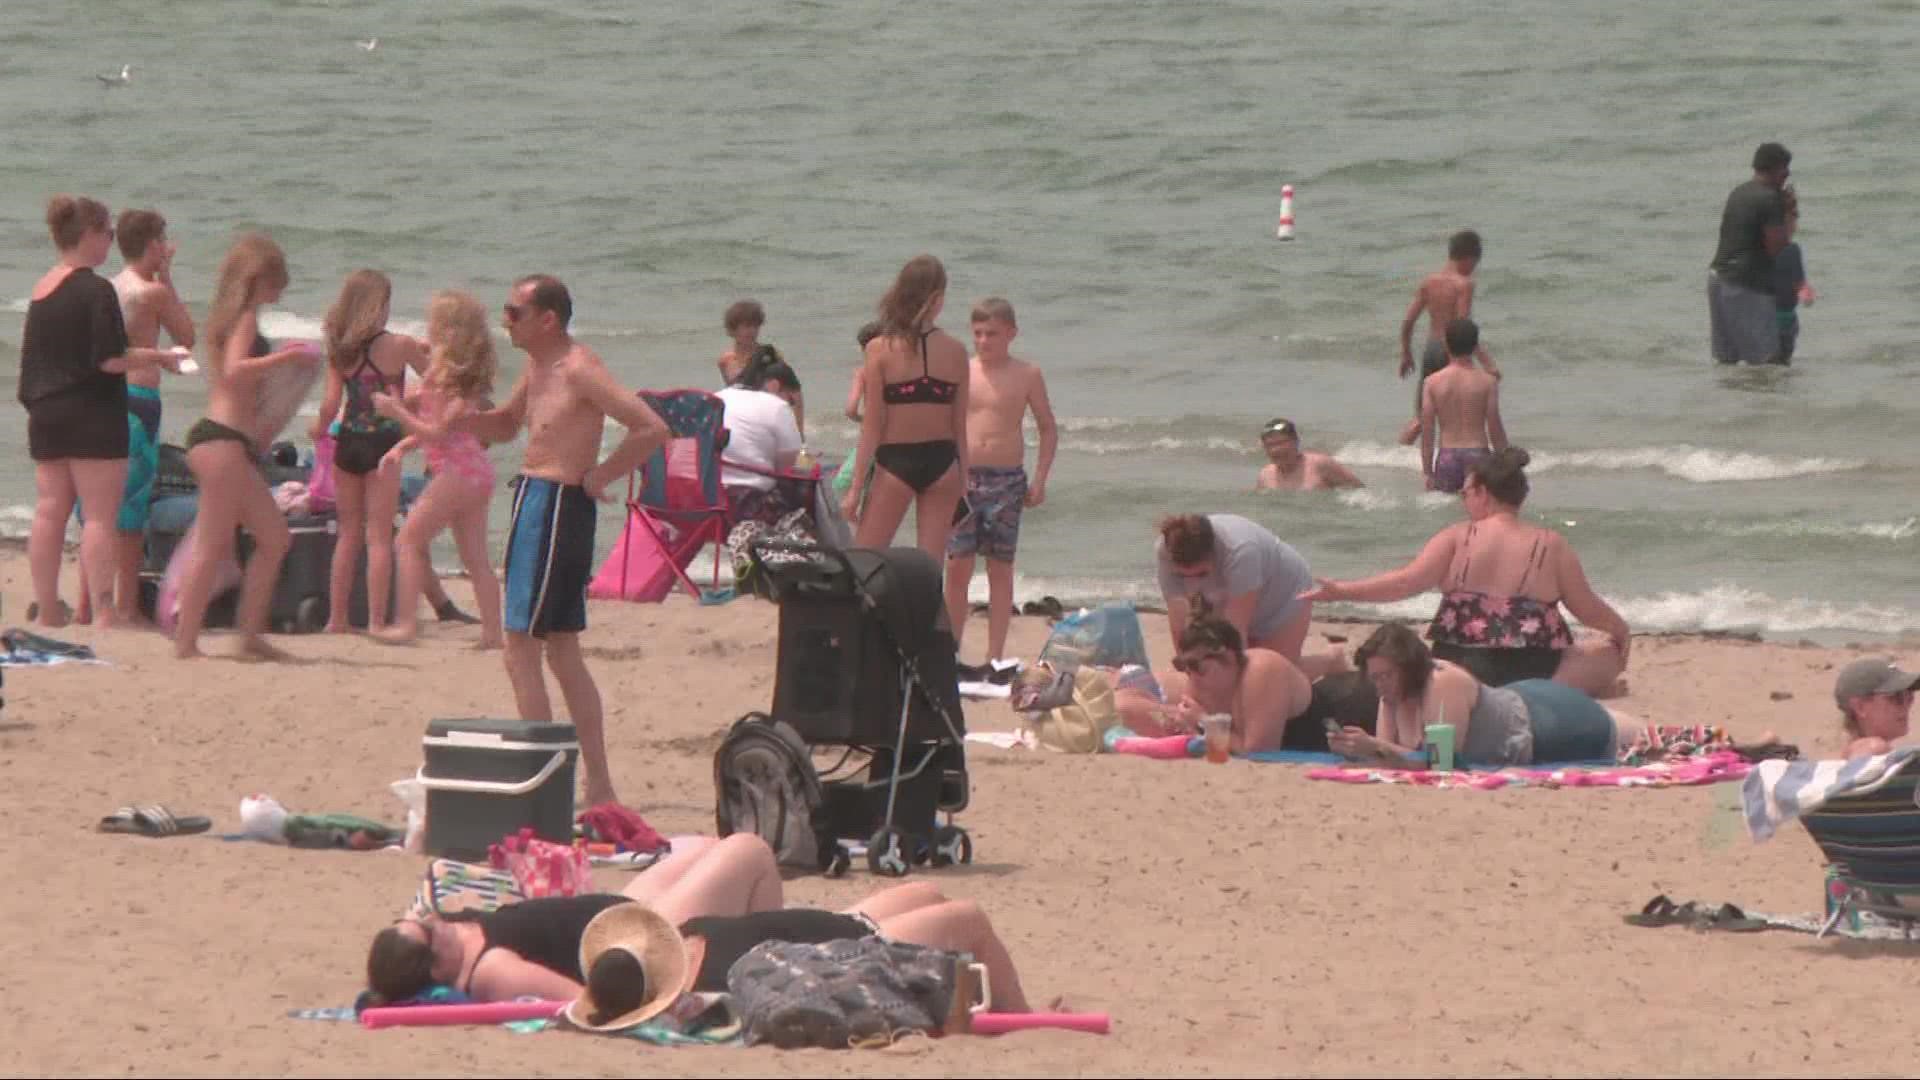 Fourth of July weekend is almost here. Perfect time to hit the beach! But some folks hit the beach a little too hard with pollution and waste.